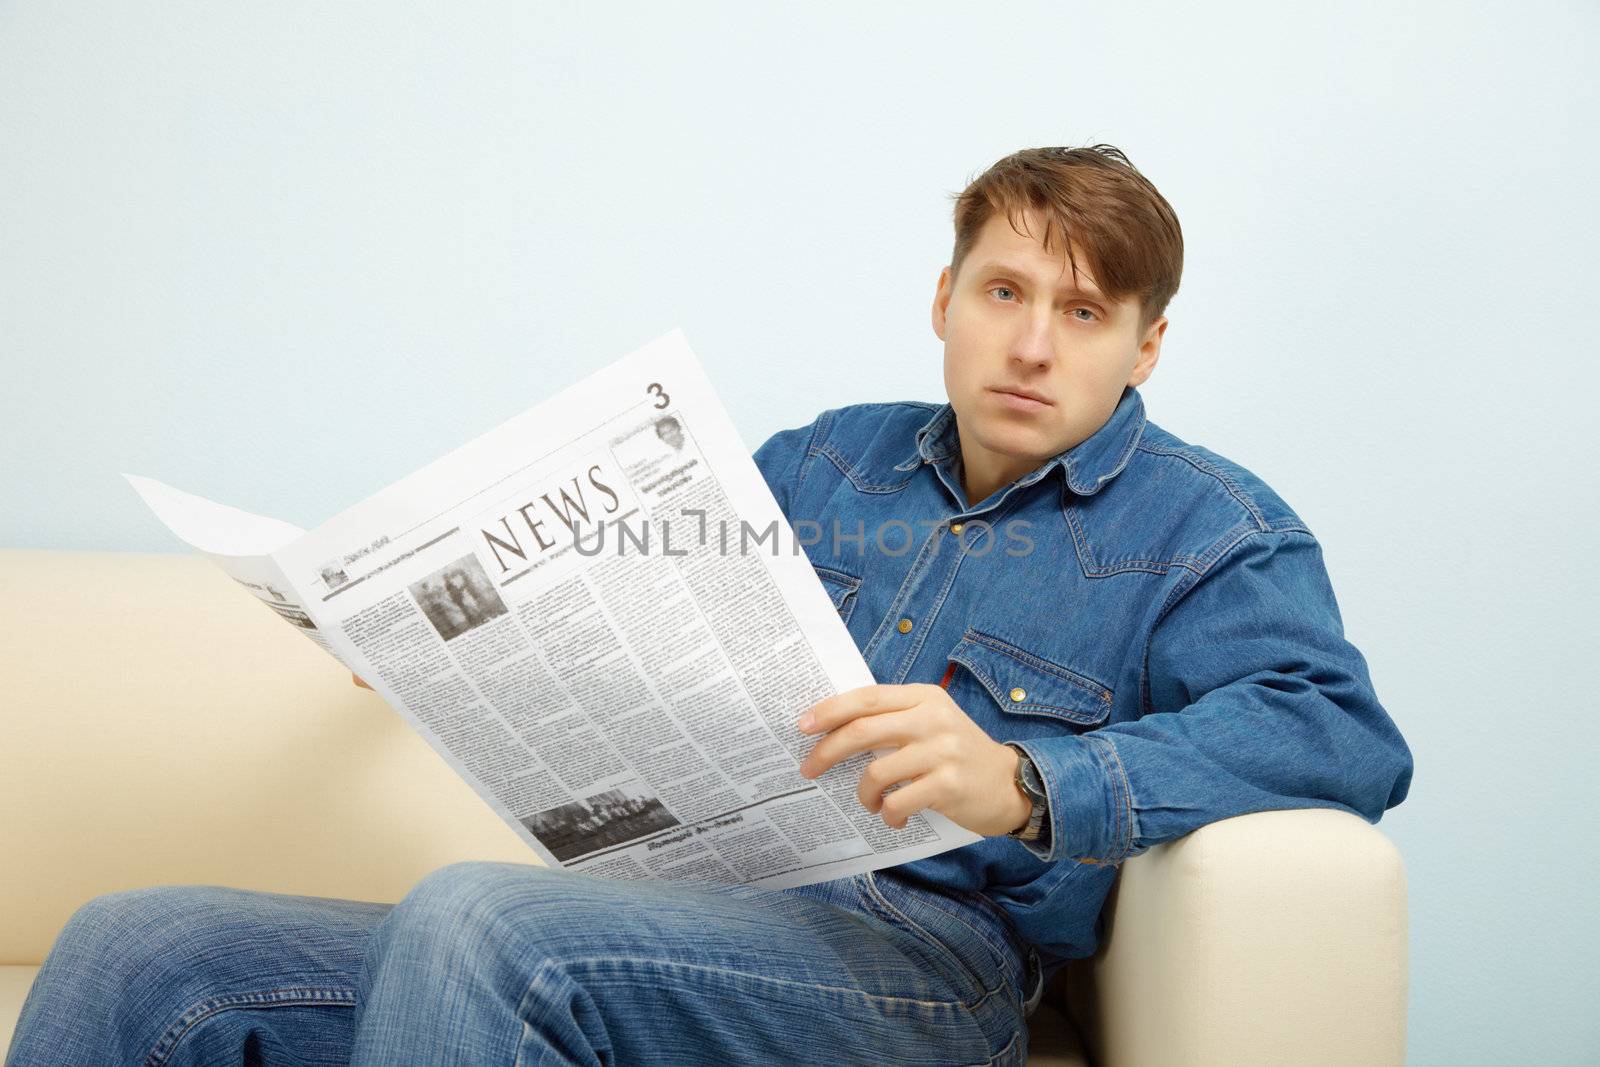 The young man disappointed with news from the newspaper